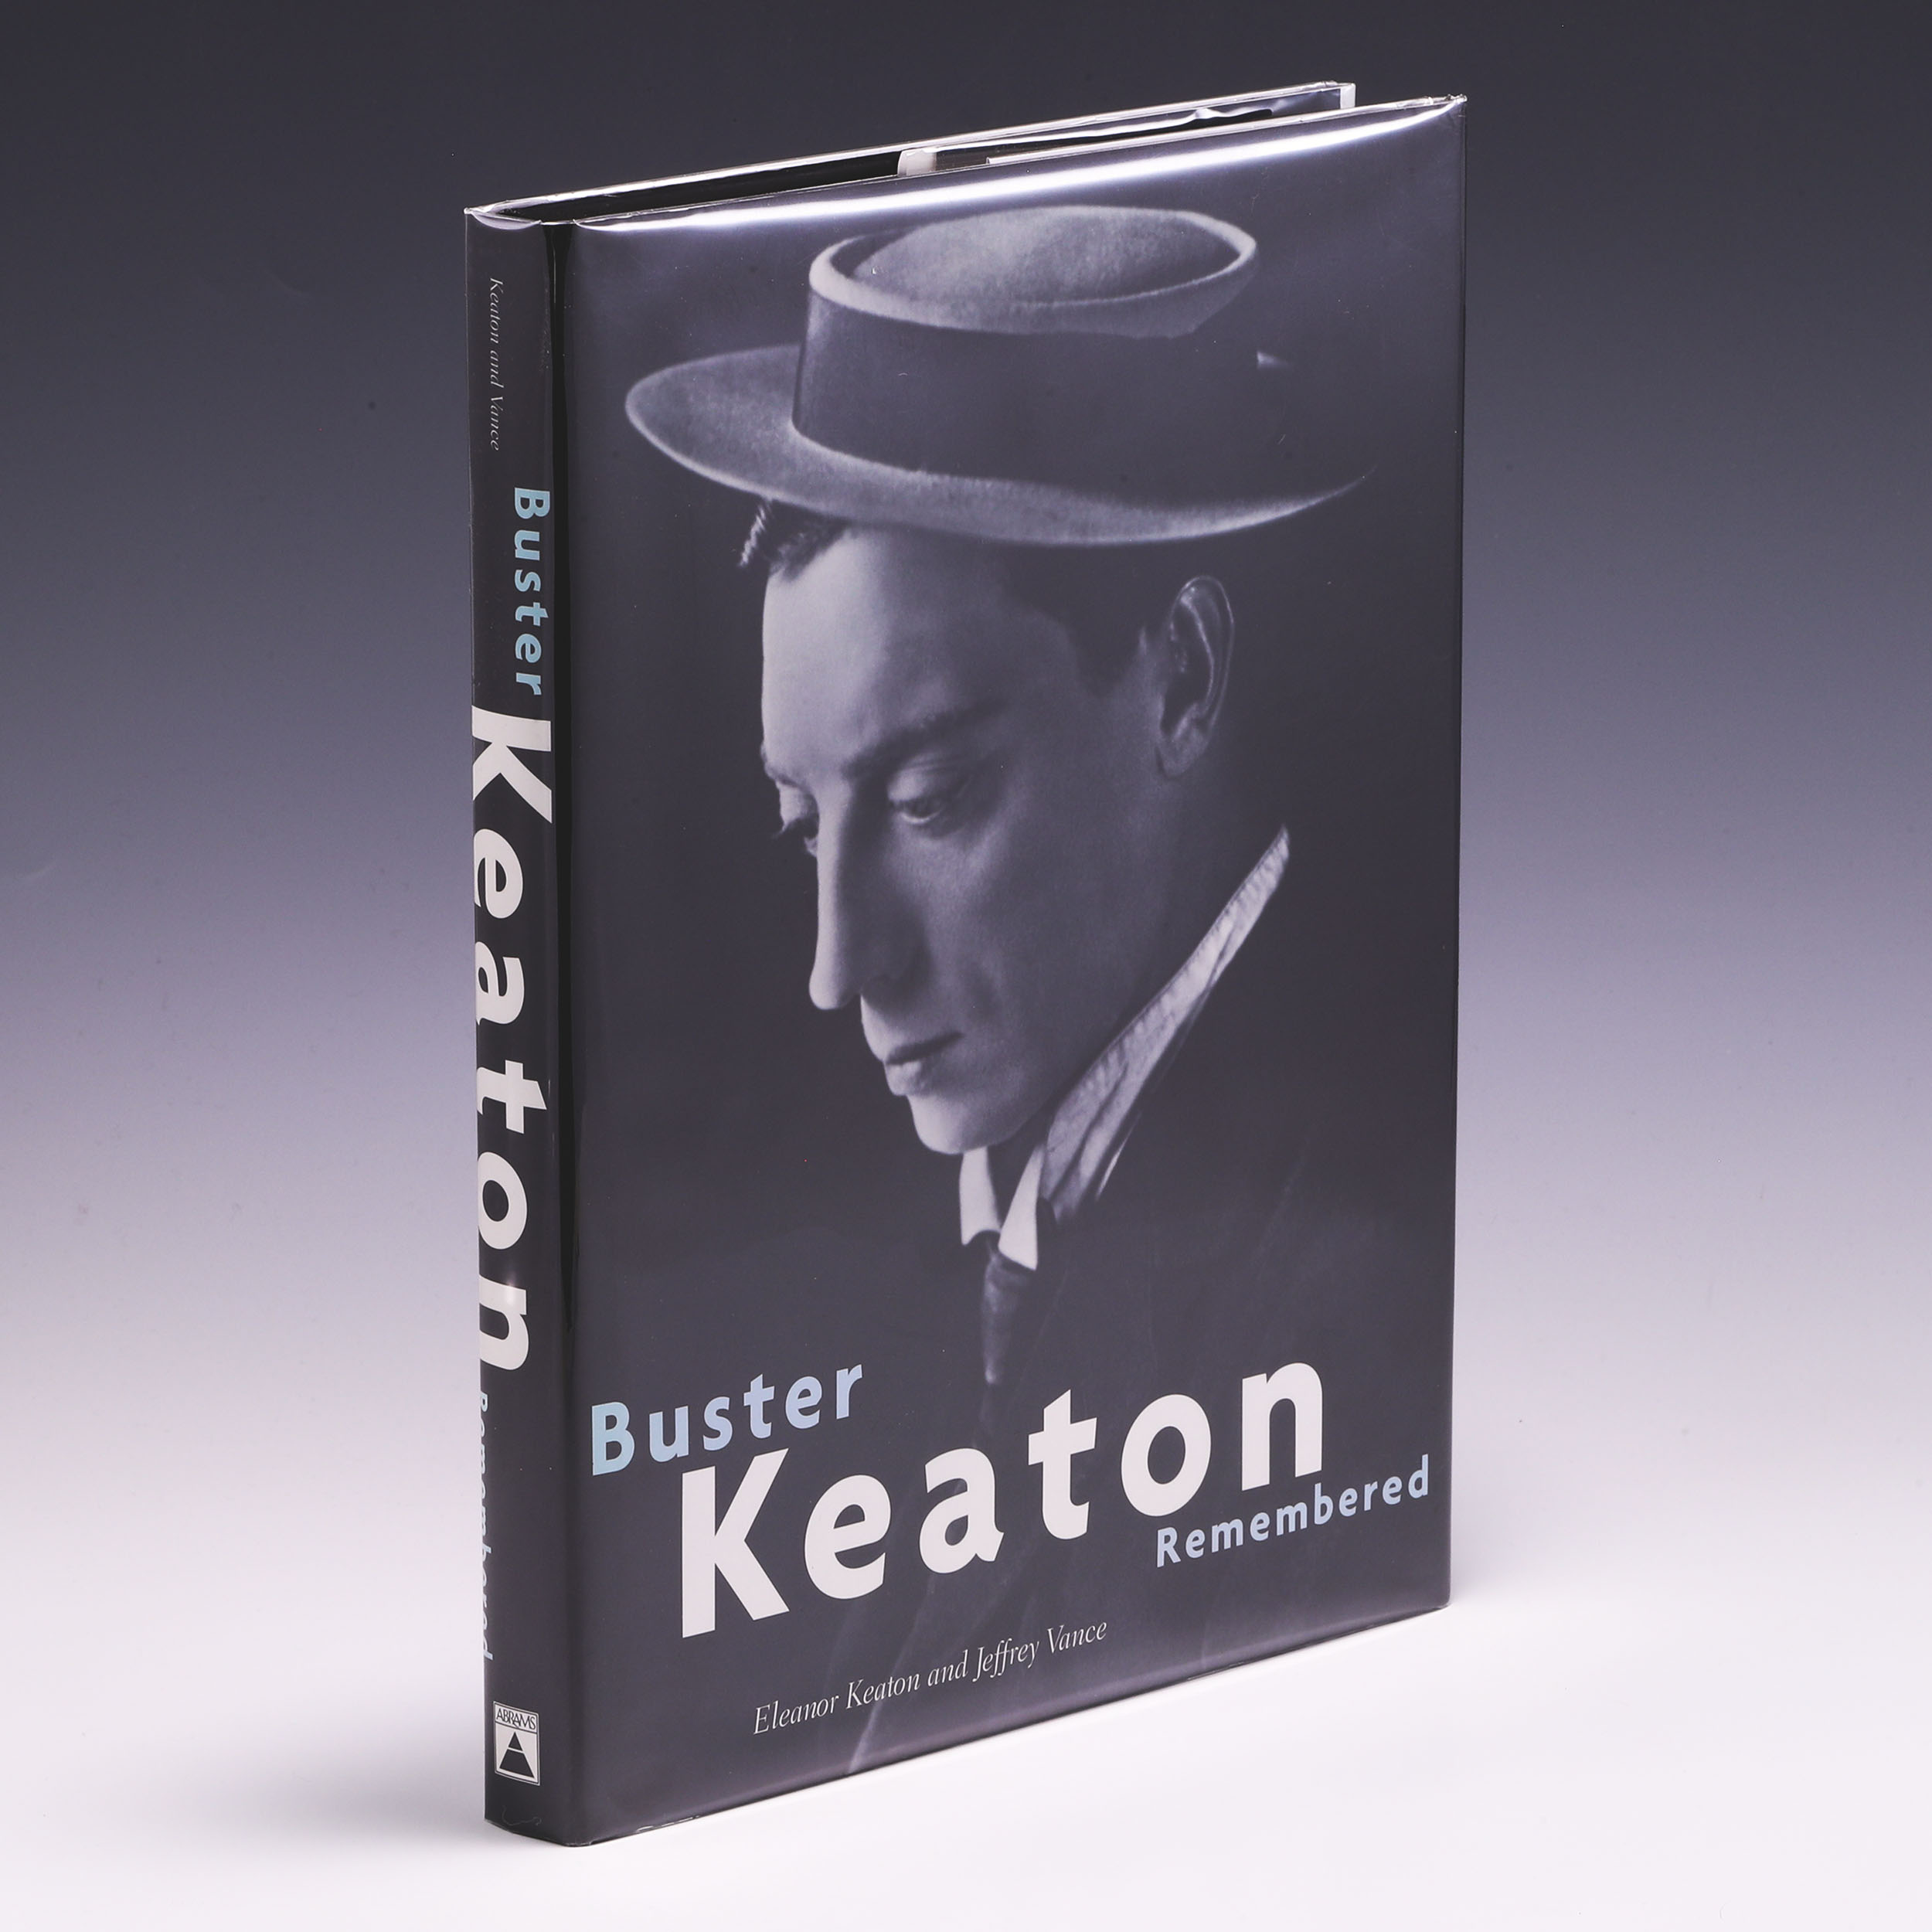 Buster Keaton: The Later Years (Paperback) 